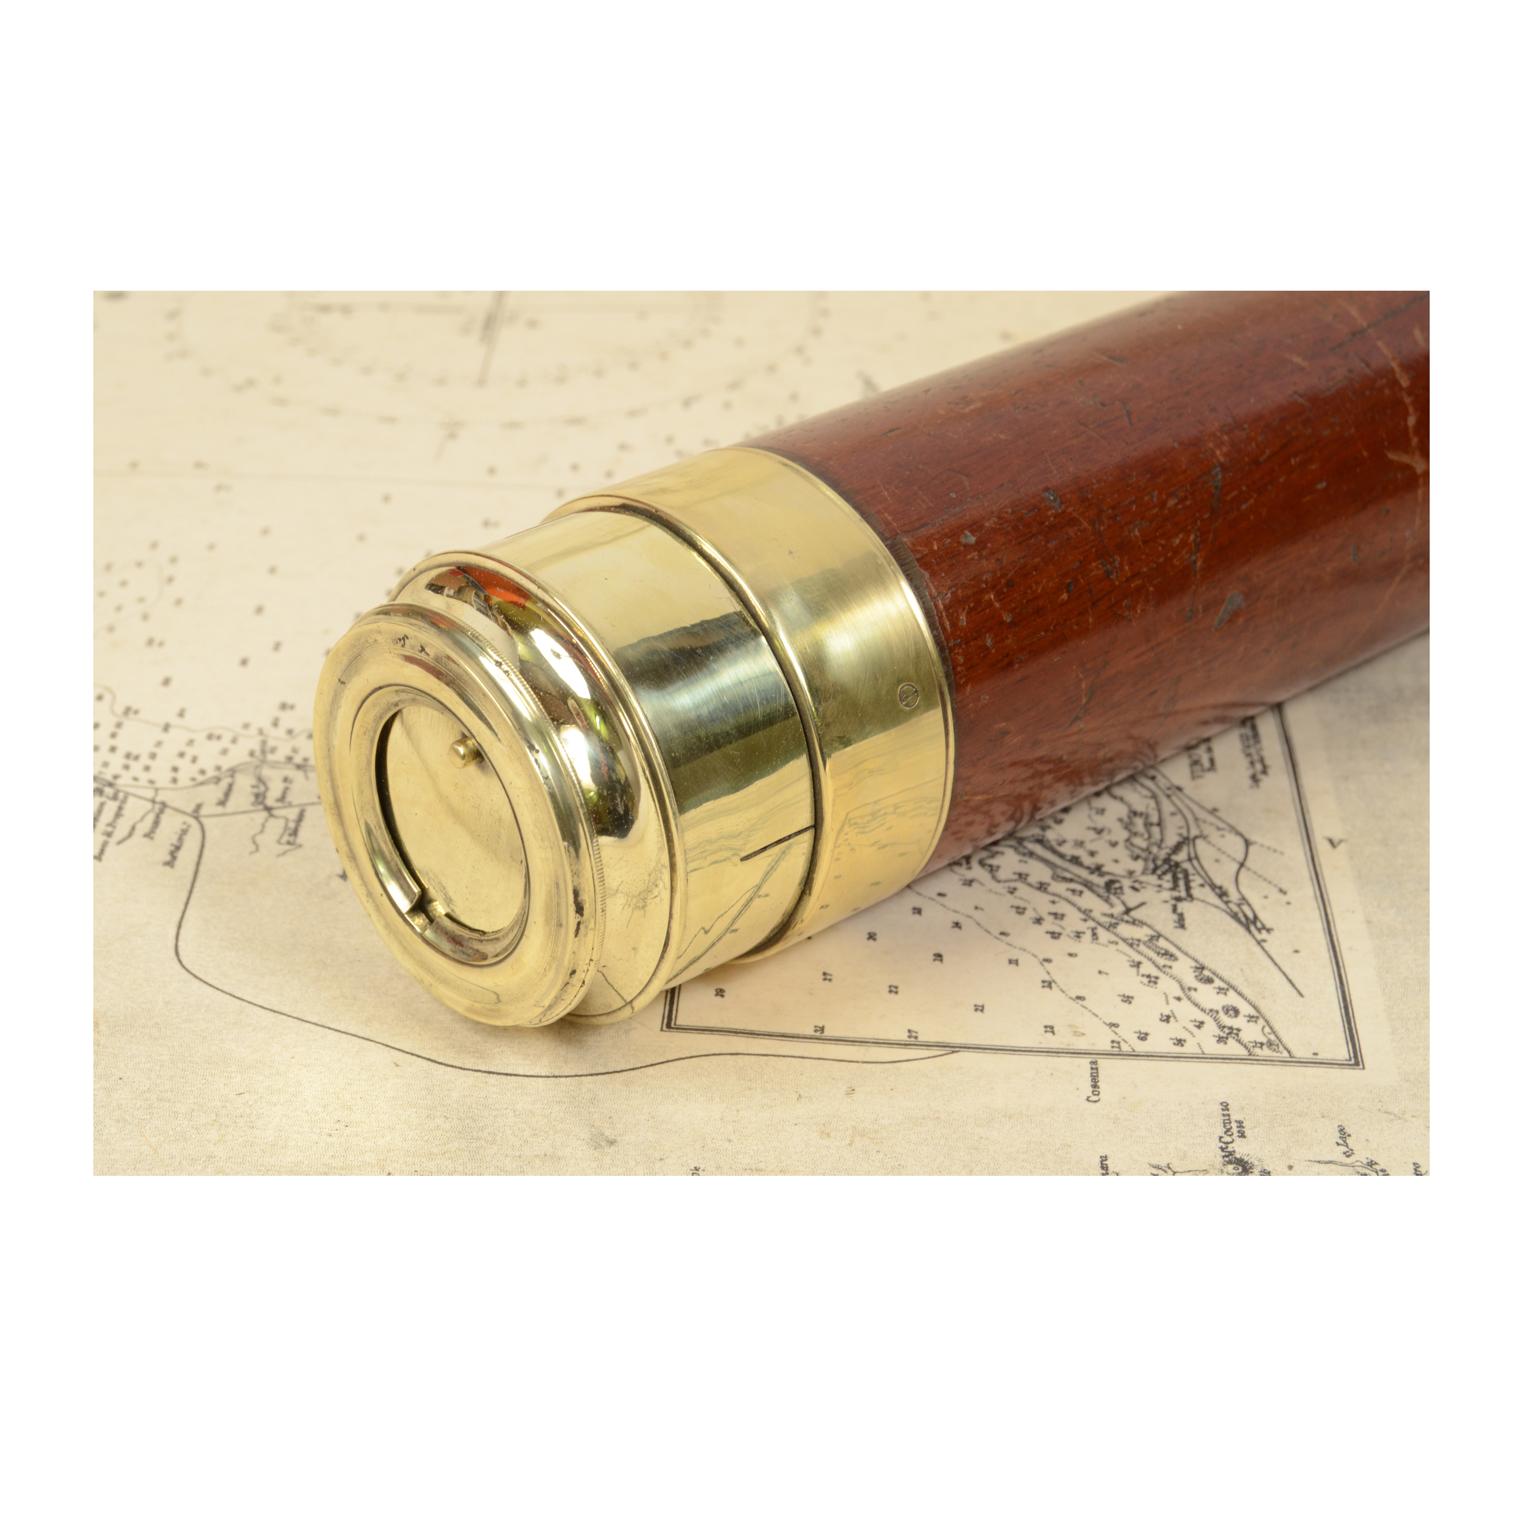 Mid-19th Century Antique Nautical Telescope, Brass and Mahogany, First Half of the 19th Century